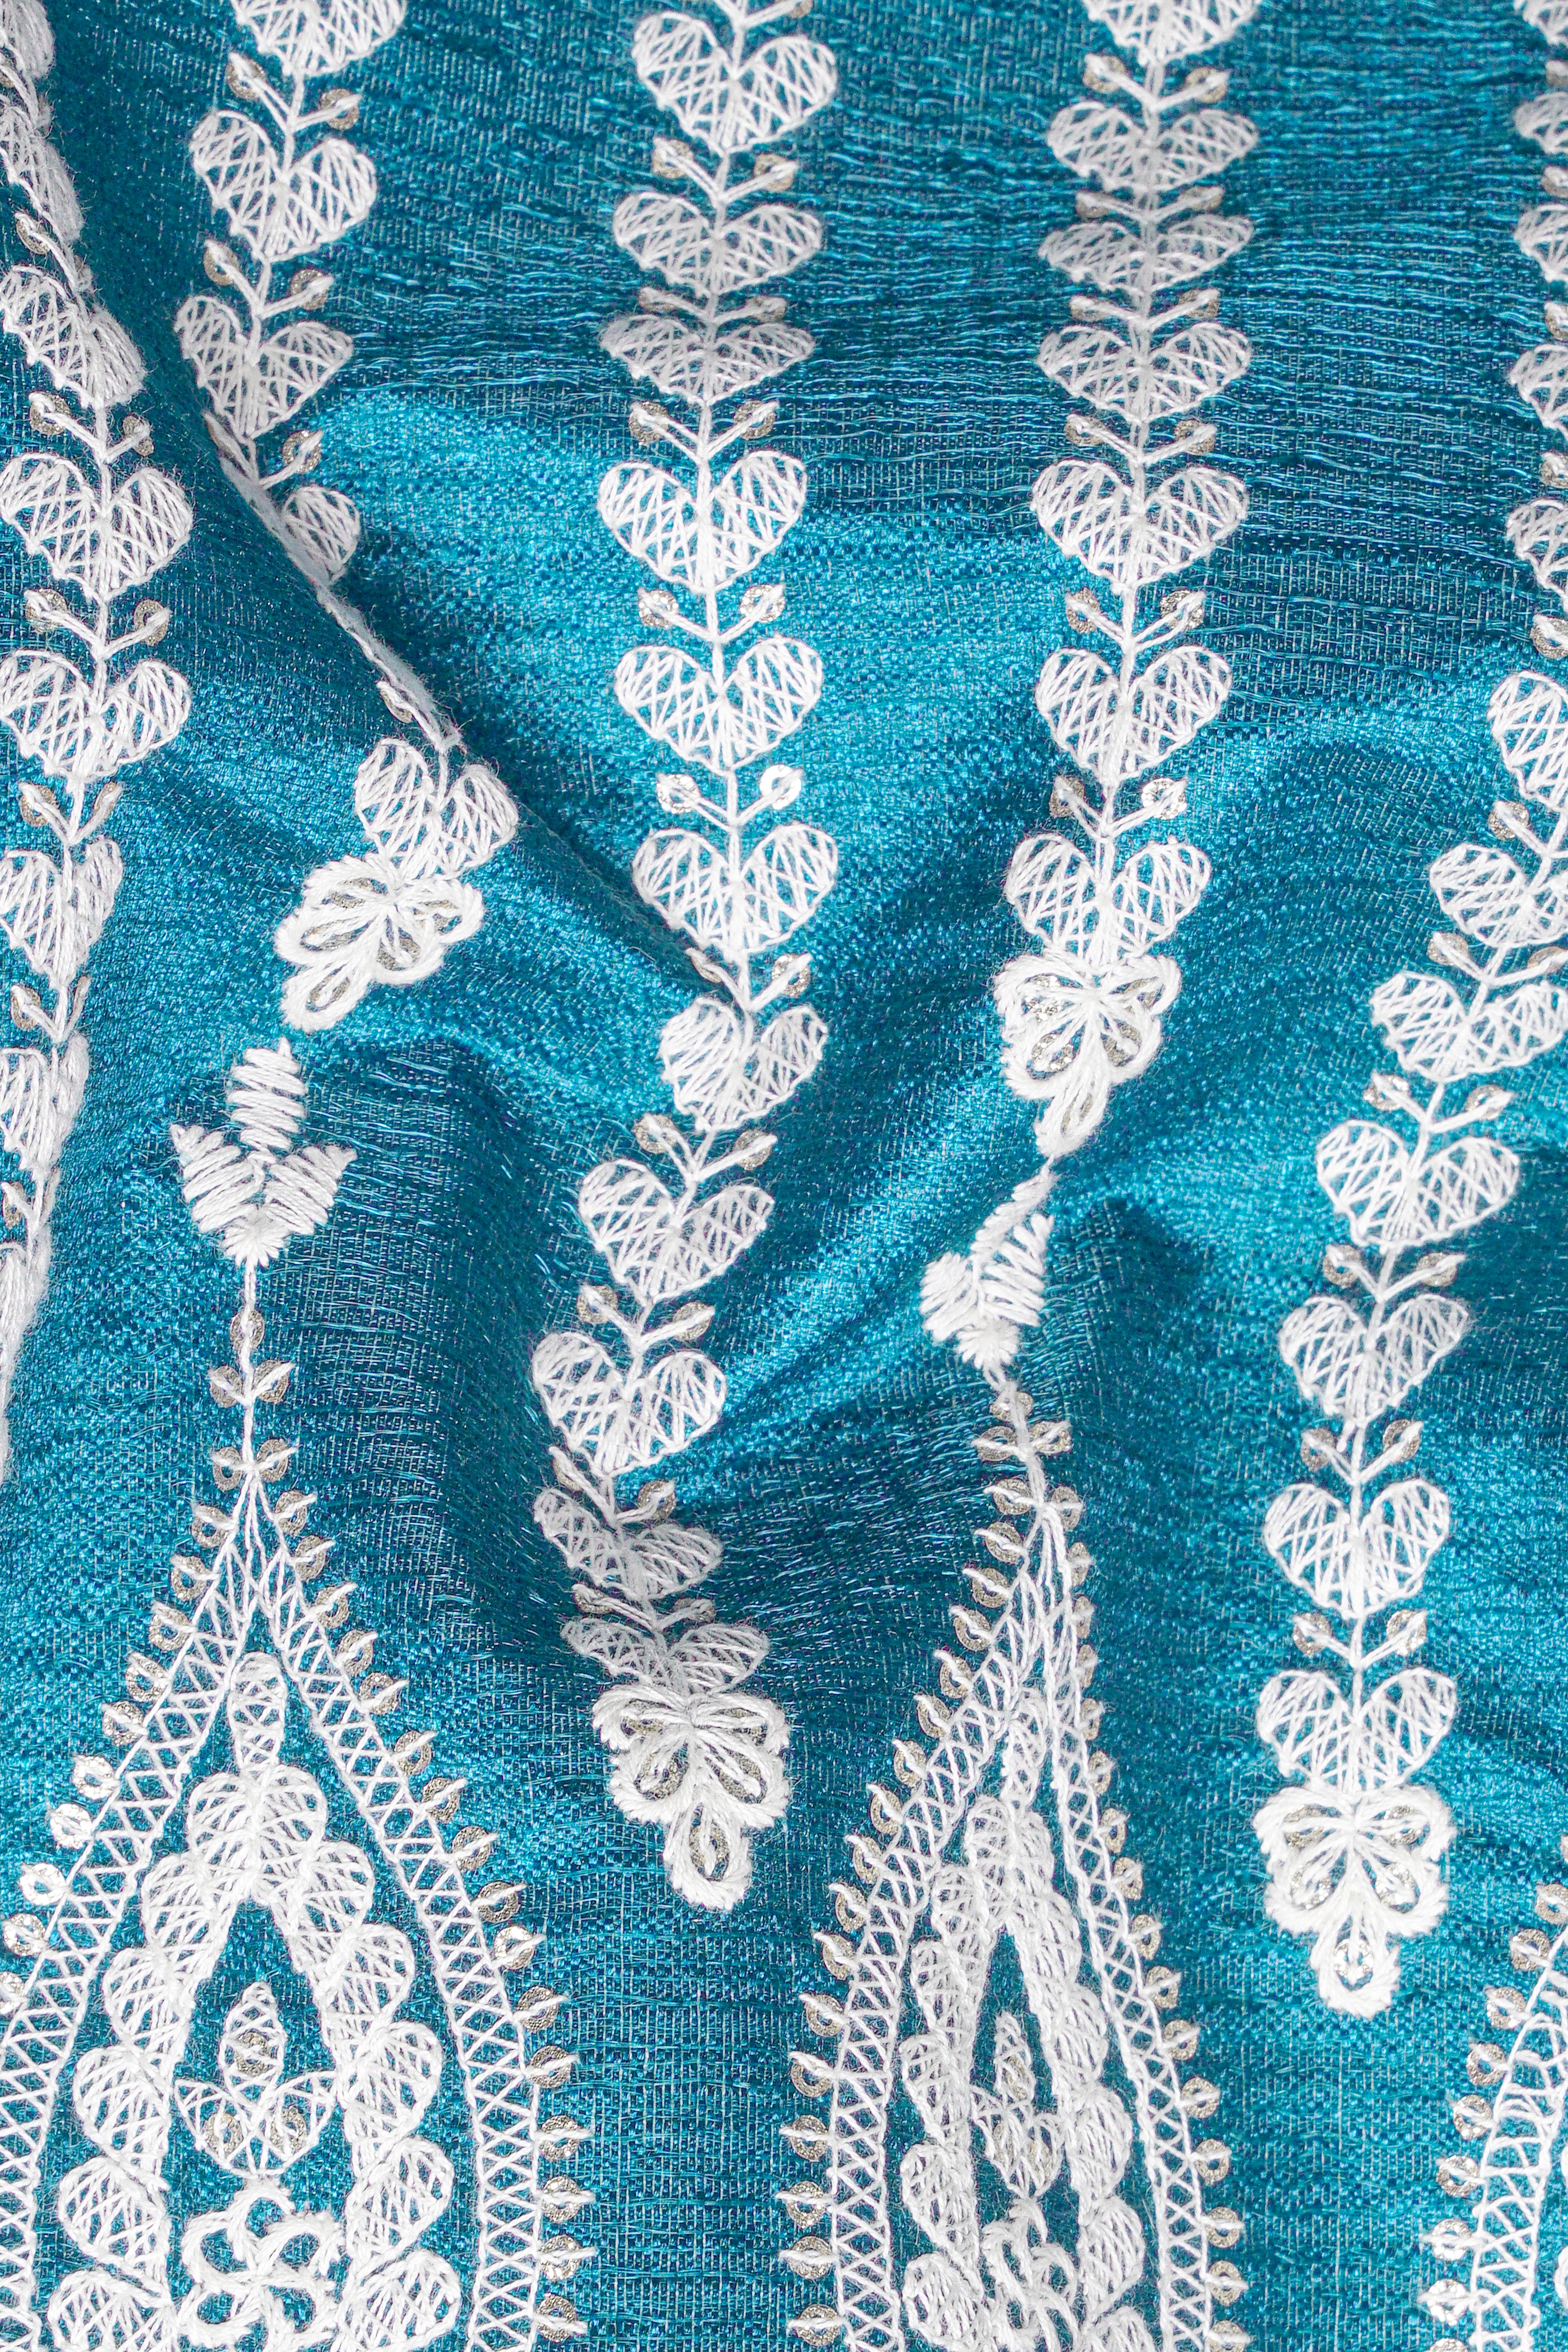 Cerulean Blue and White Thread Embroidered Bandhgala Jodhpuri BL3518-BG-36, BL3518-BG-38, BL3518-BG-40, BL3518-BG-42, BL3518-BG-44, BL3518-BG-46, BL3518-BG-51, BL3518-BG-50, BL3518-BG-52, BL3518-BG-54, BL3518-BG-56, BL3518-BG-58, BL3518-BG-60